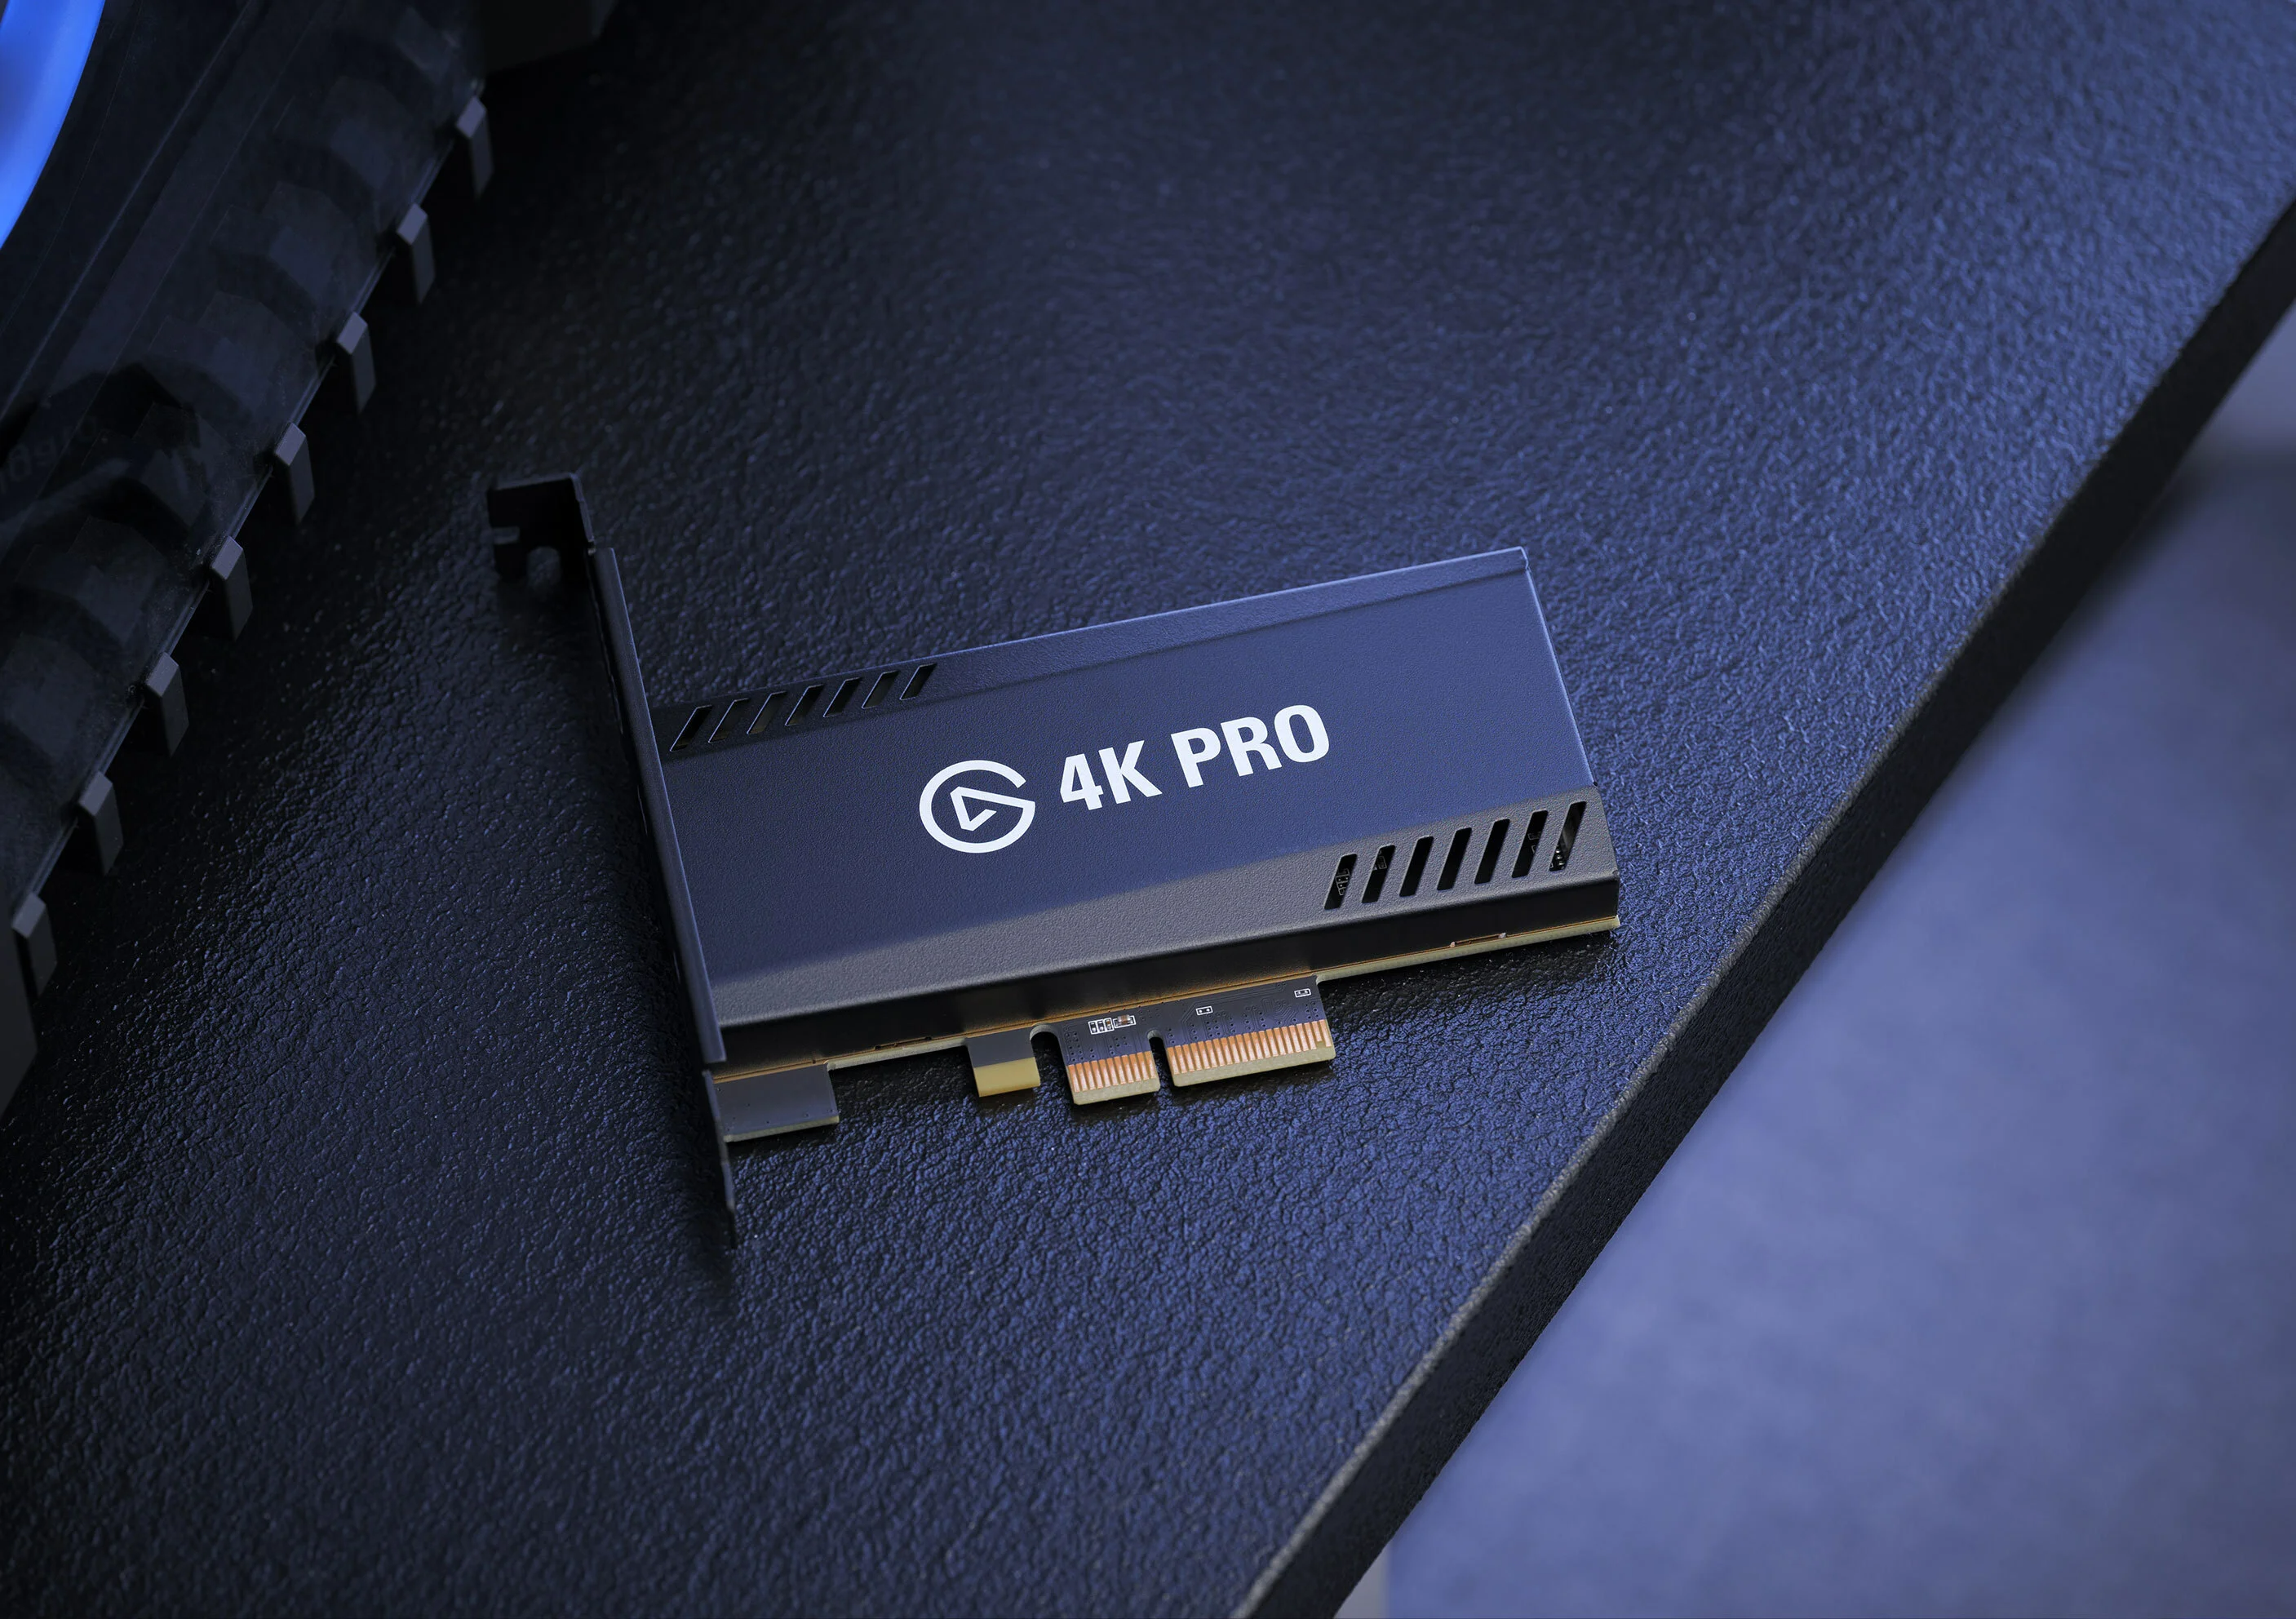 A large marketing image providing additional information about the product Elgato Game Capture 4K Pro - Additional alt info not provided